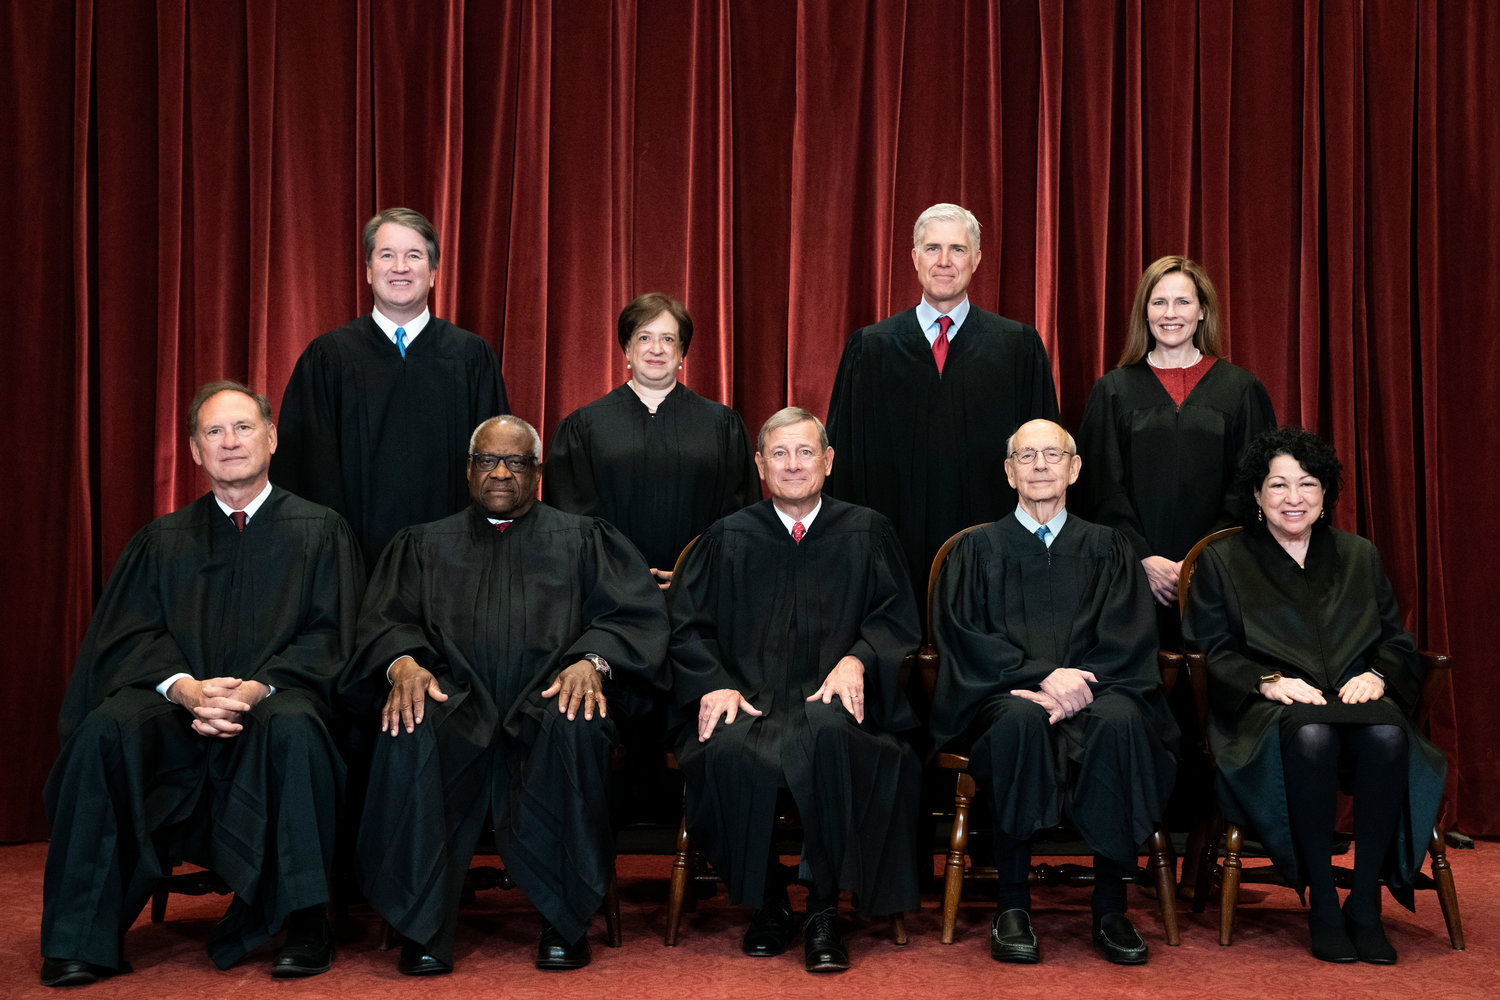 FILE - Members of the Supreme Court pose for a group photo at the Supreme Court in Washington, April 23, 2021. Seated from left are Associate Justice Samuel Alito, Associate Justice Clarence Thomas, Chief Justice John Roberts, Associate Justice Stephen Breyer and Associate Justice Sonia Sotomayor, Standing from left are Associate Justice Brett Kavanaugh, Associate Justice Elena Kagan, Associate Justice Neil Gorsuch and Associate Justice Amy Coney Barrett. The Supreme Court has ended constitutional protections for abortion that had been in place nearly 50 years ‚Äî a decision by its conservative majority to overturn the court's landmark abortion cases. (Erin Schaff/The New York Times via AP, Pool, File)